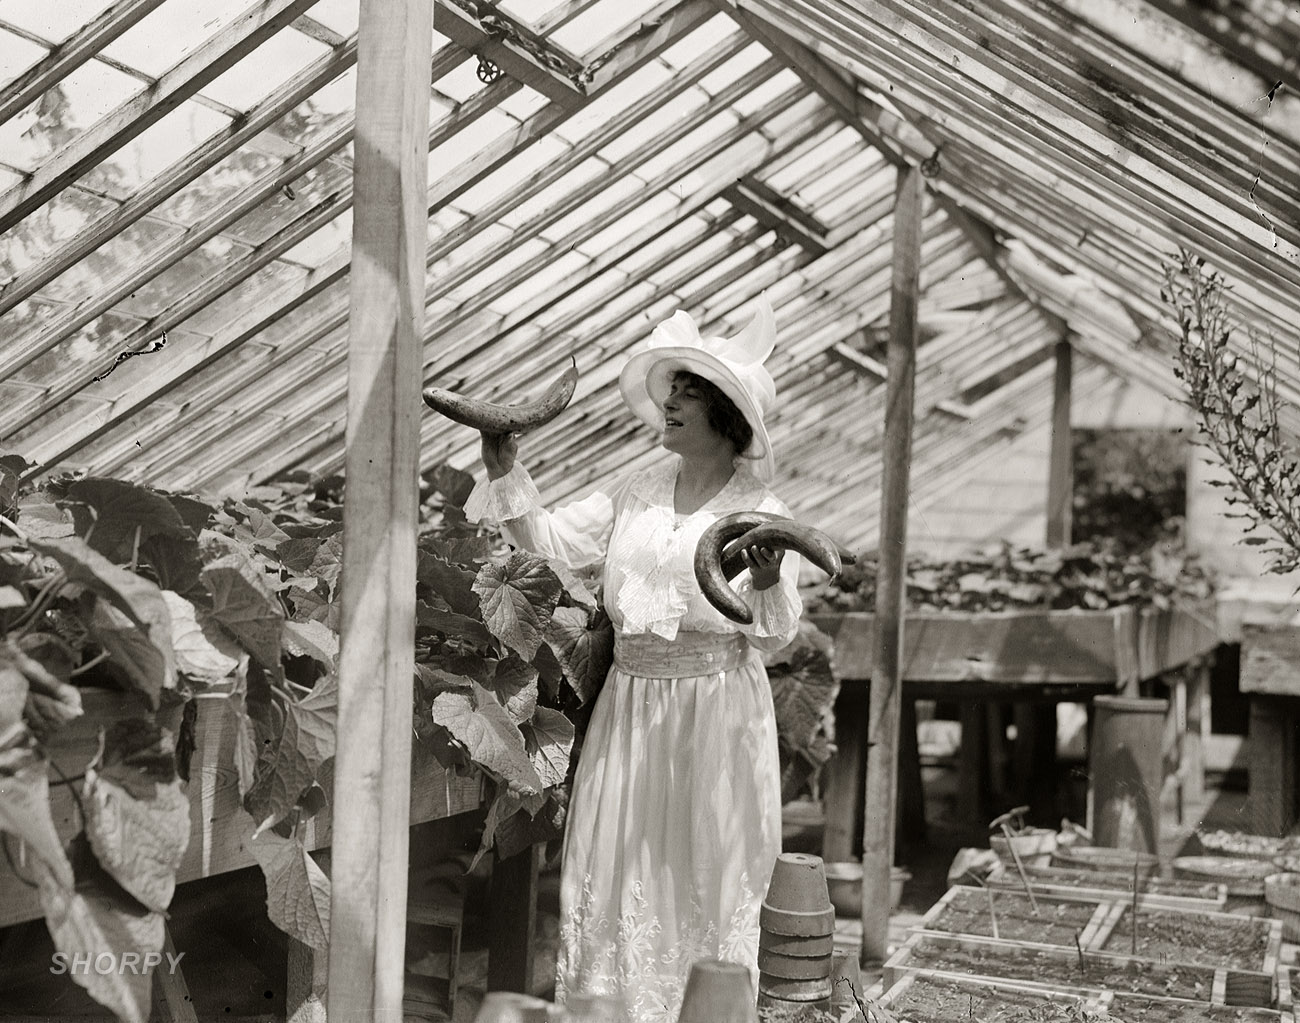 The New Zealand-born soprano Frances Alda, who seems to have been something of a horticulturist. 5x7 glass negative, G.G. Bain Collection. View full size.